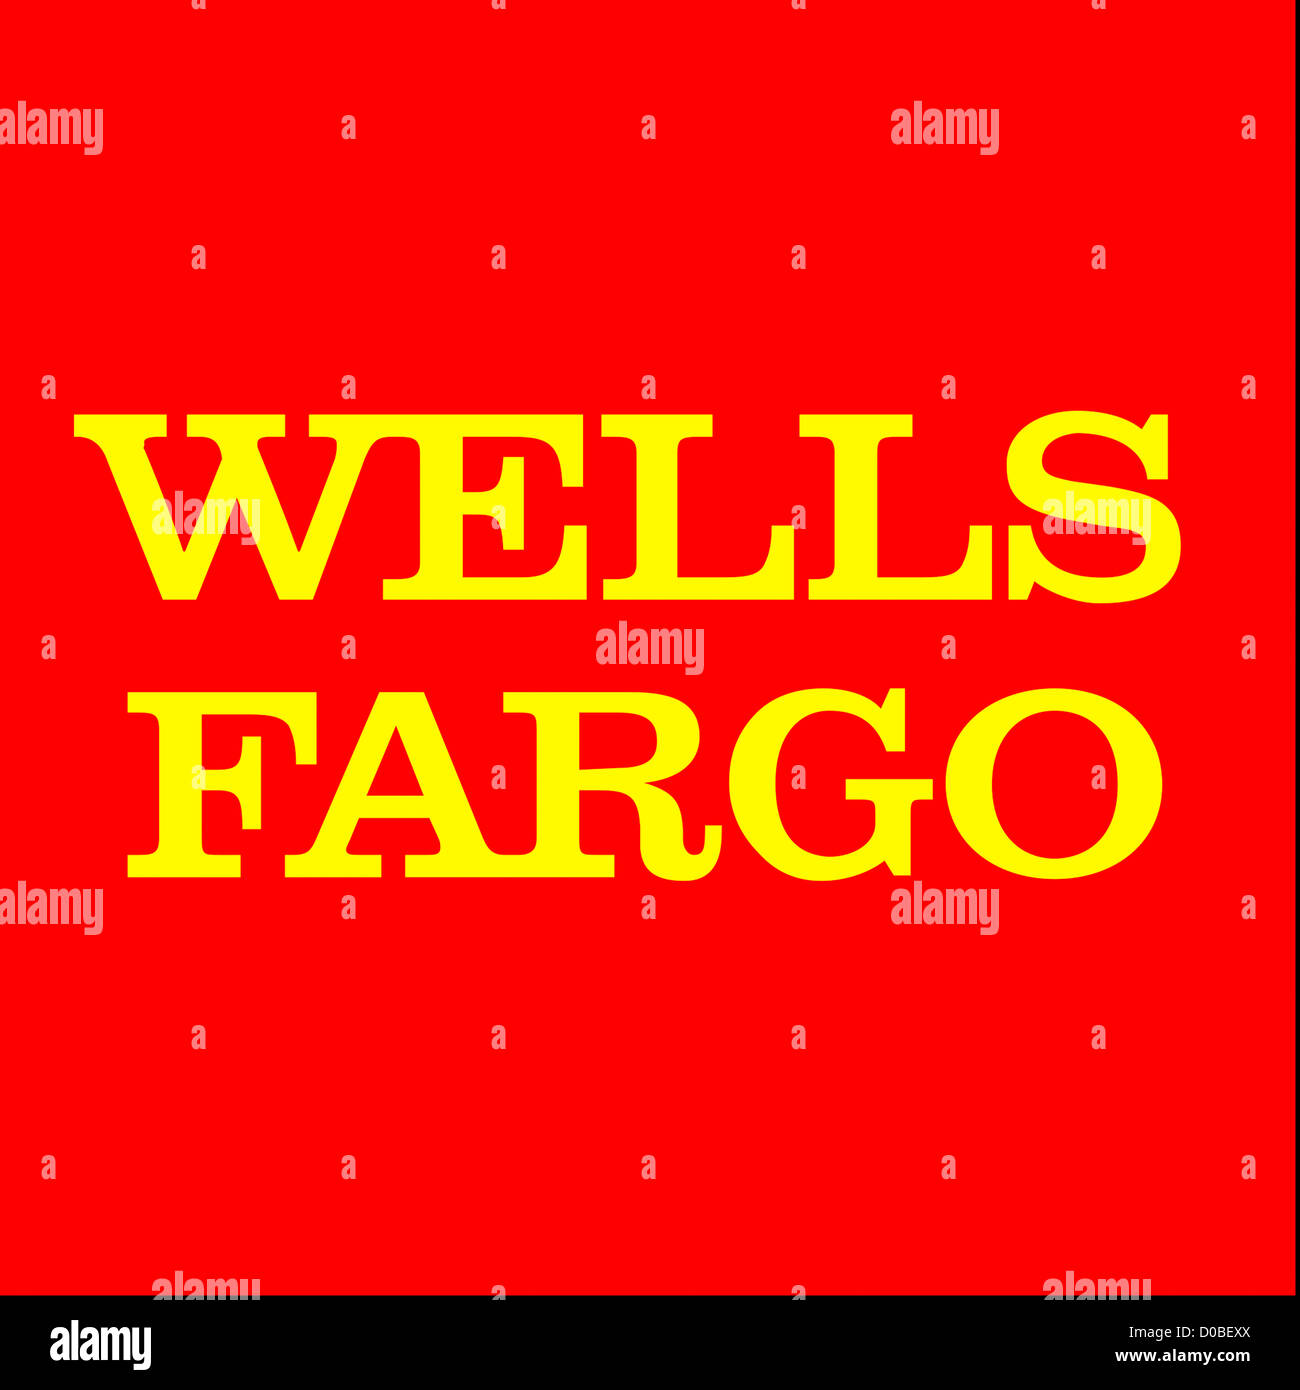 Logo of the American financial service provider Wells Fargo based in the Californian San Francisco. Stock Photo